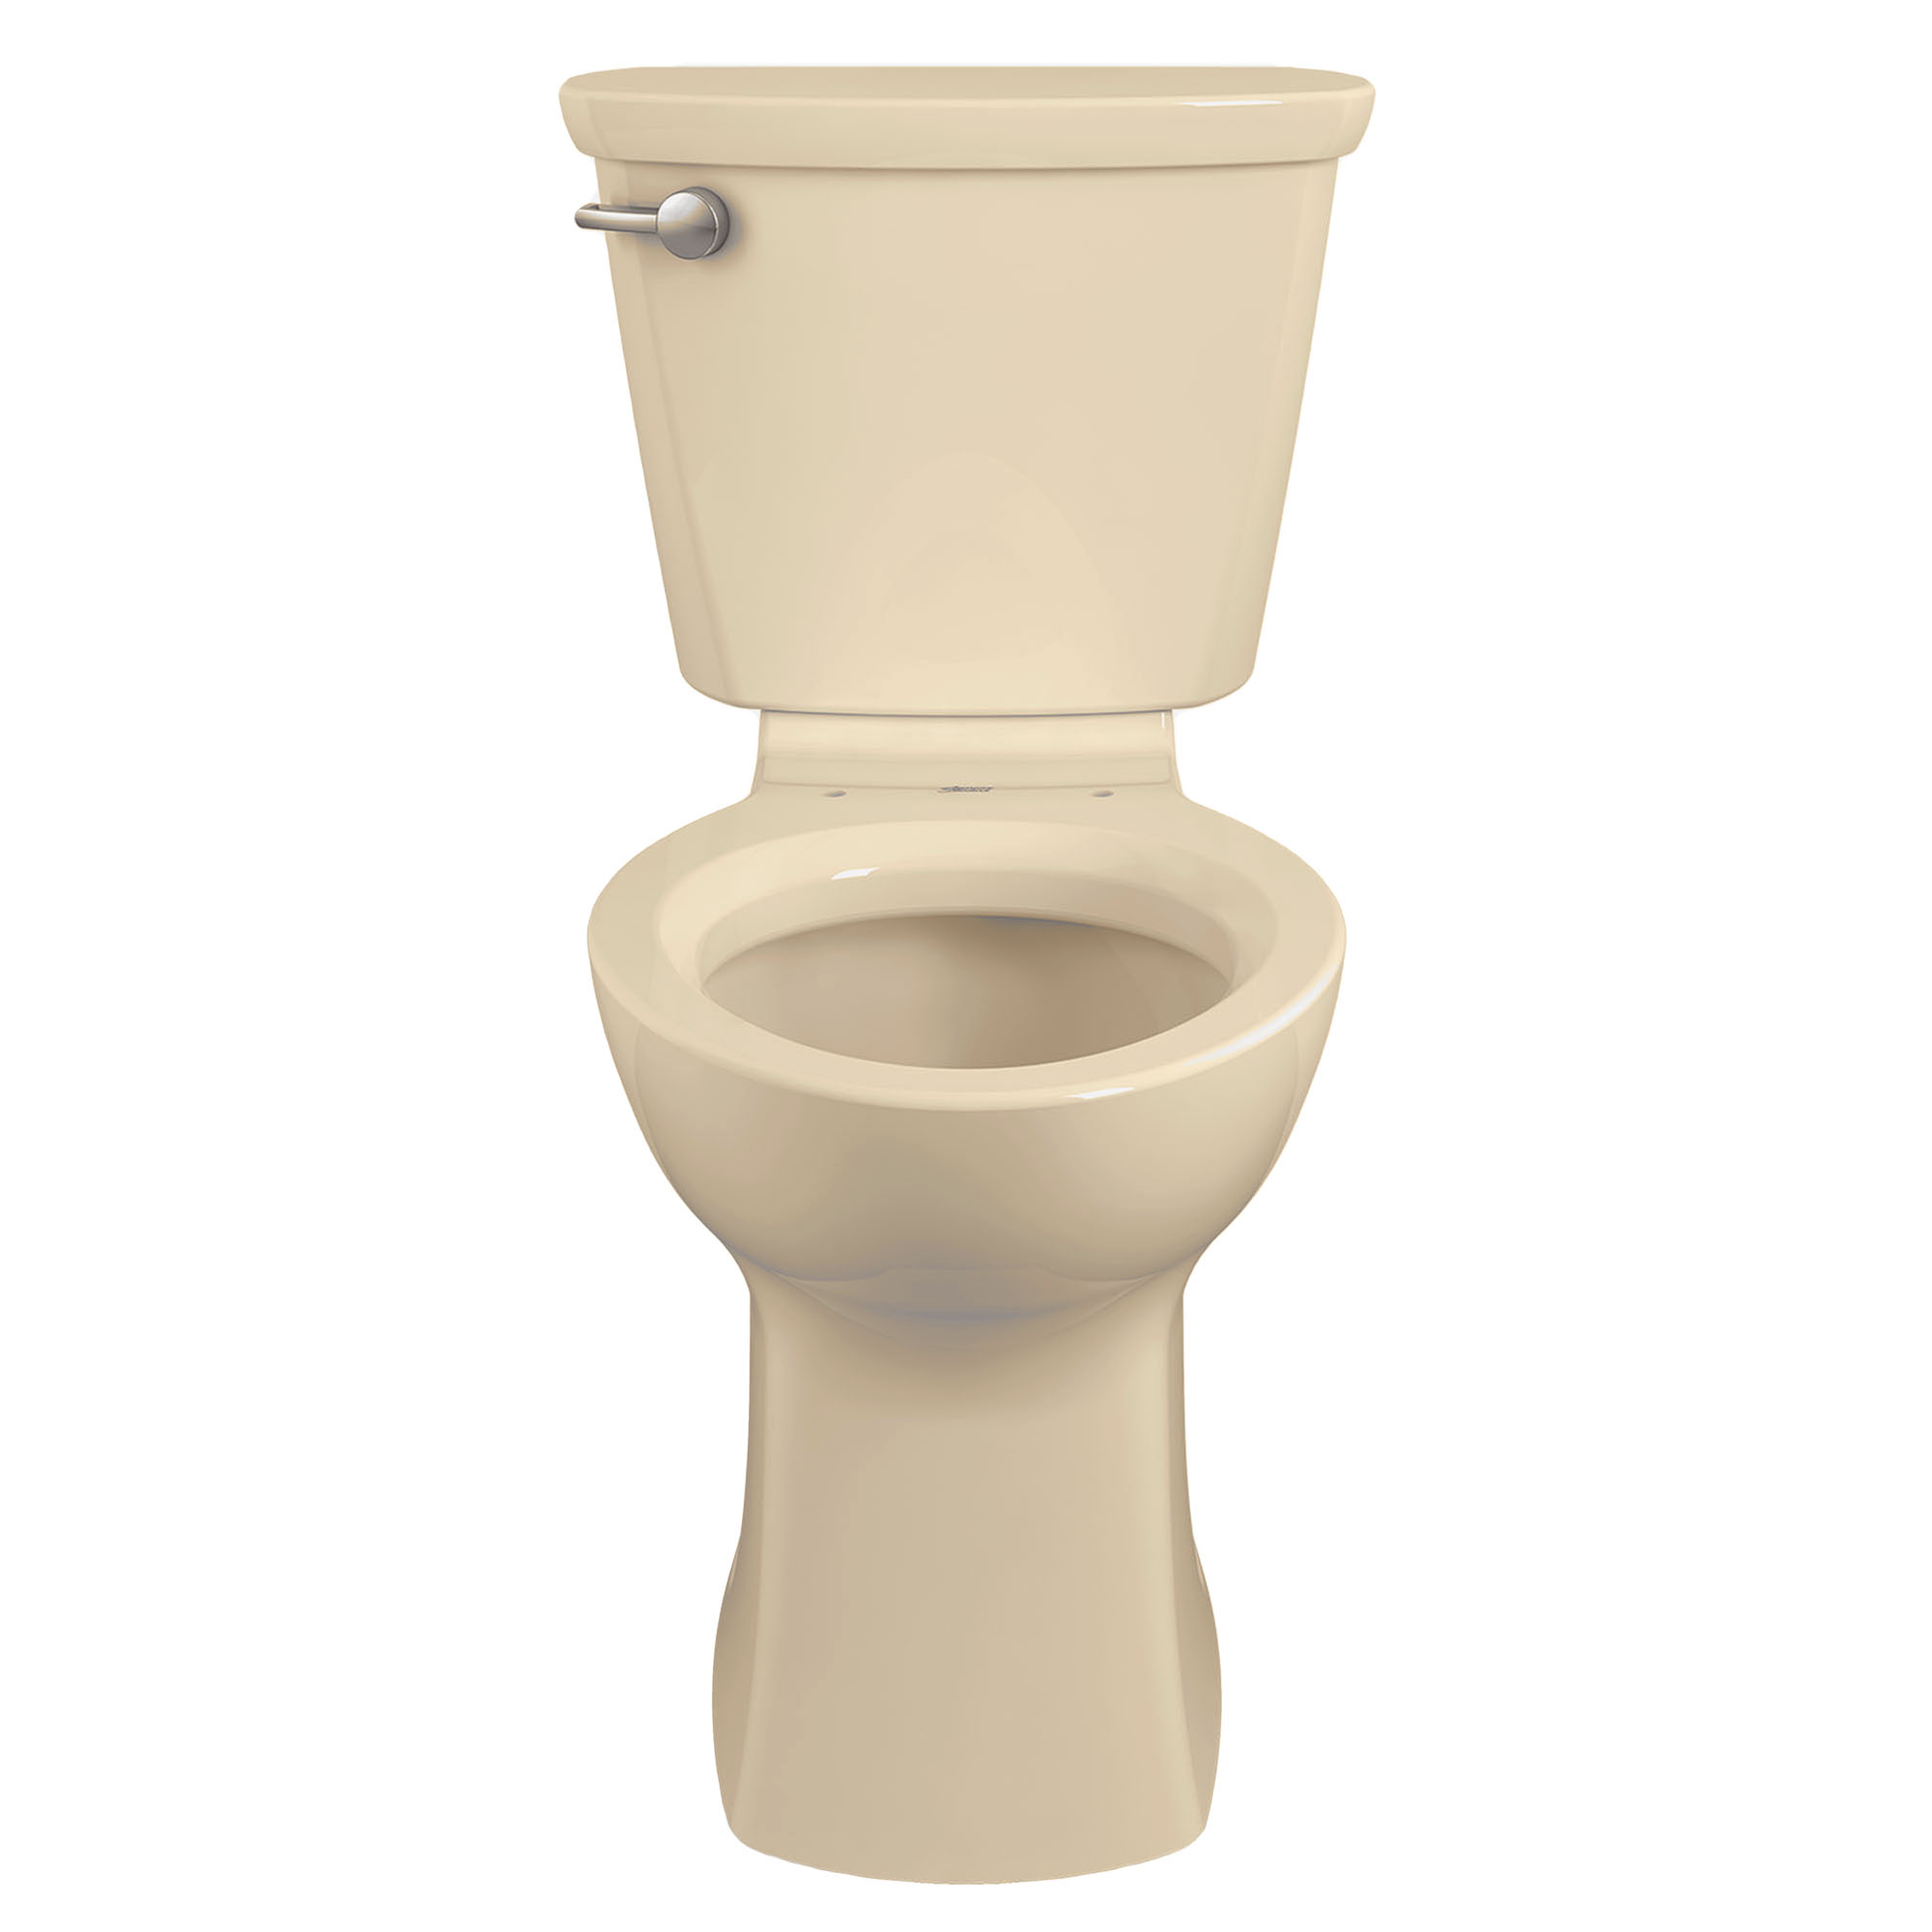 Cadet™ PRO Two-Piece 1.6 gpf/6.0 Lpf Chair Height Elongated 10-Inch Rough Toilet Less Seat